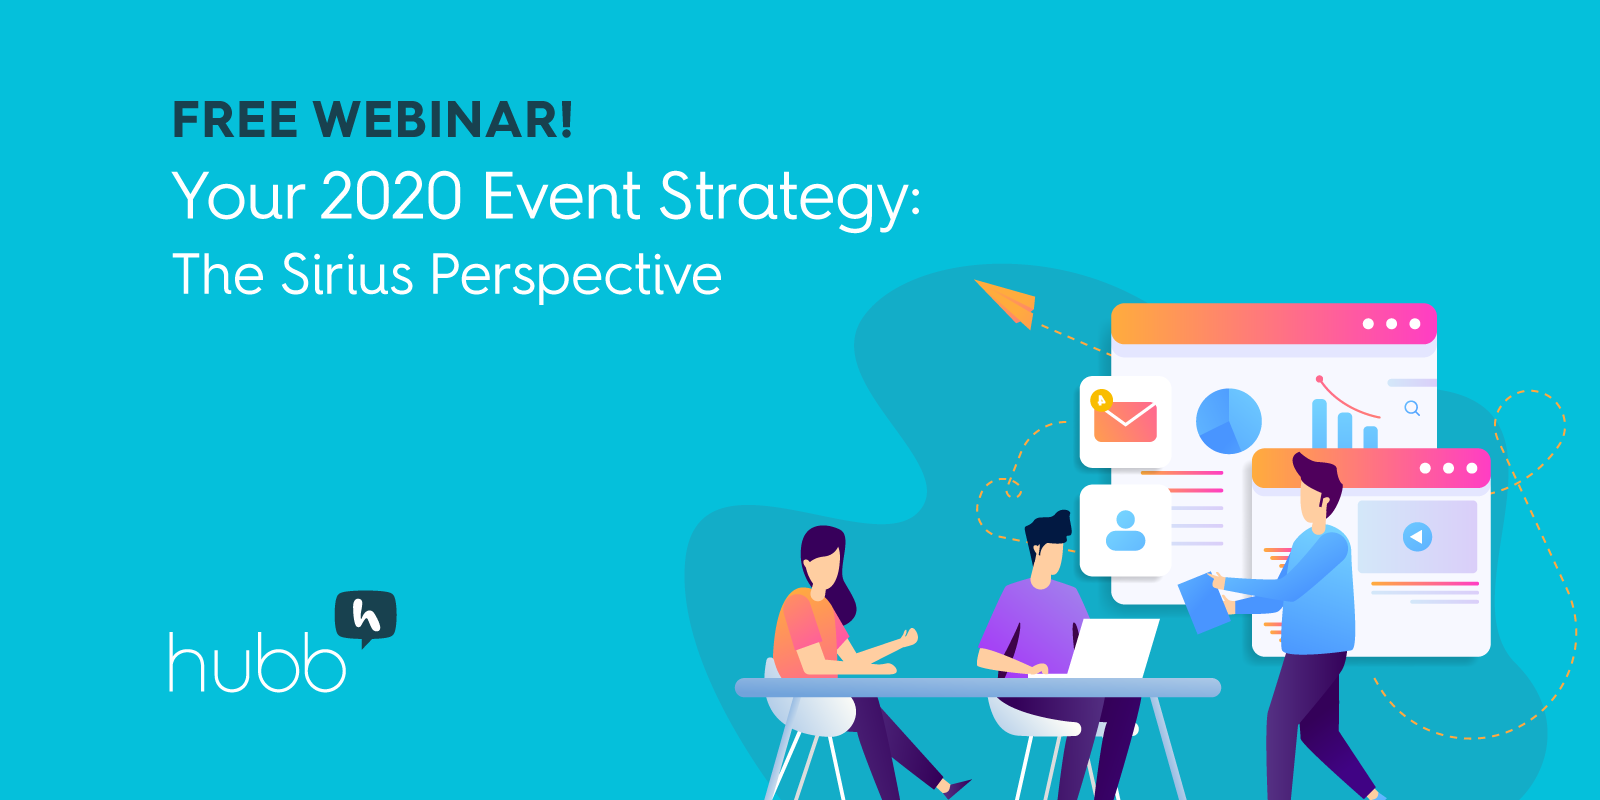 Your 2020 Event Strategy: The Sirius Perspective